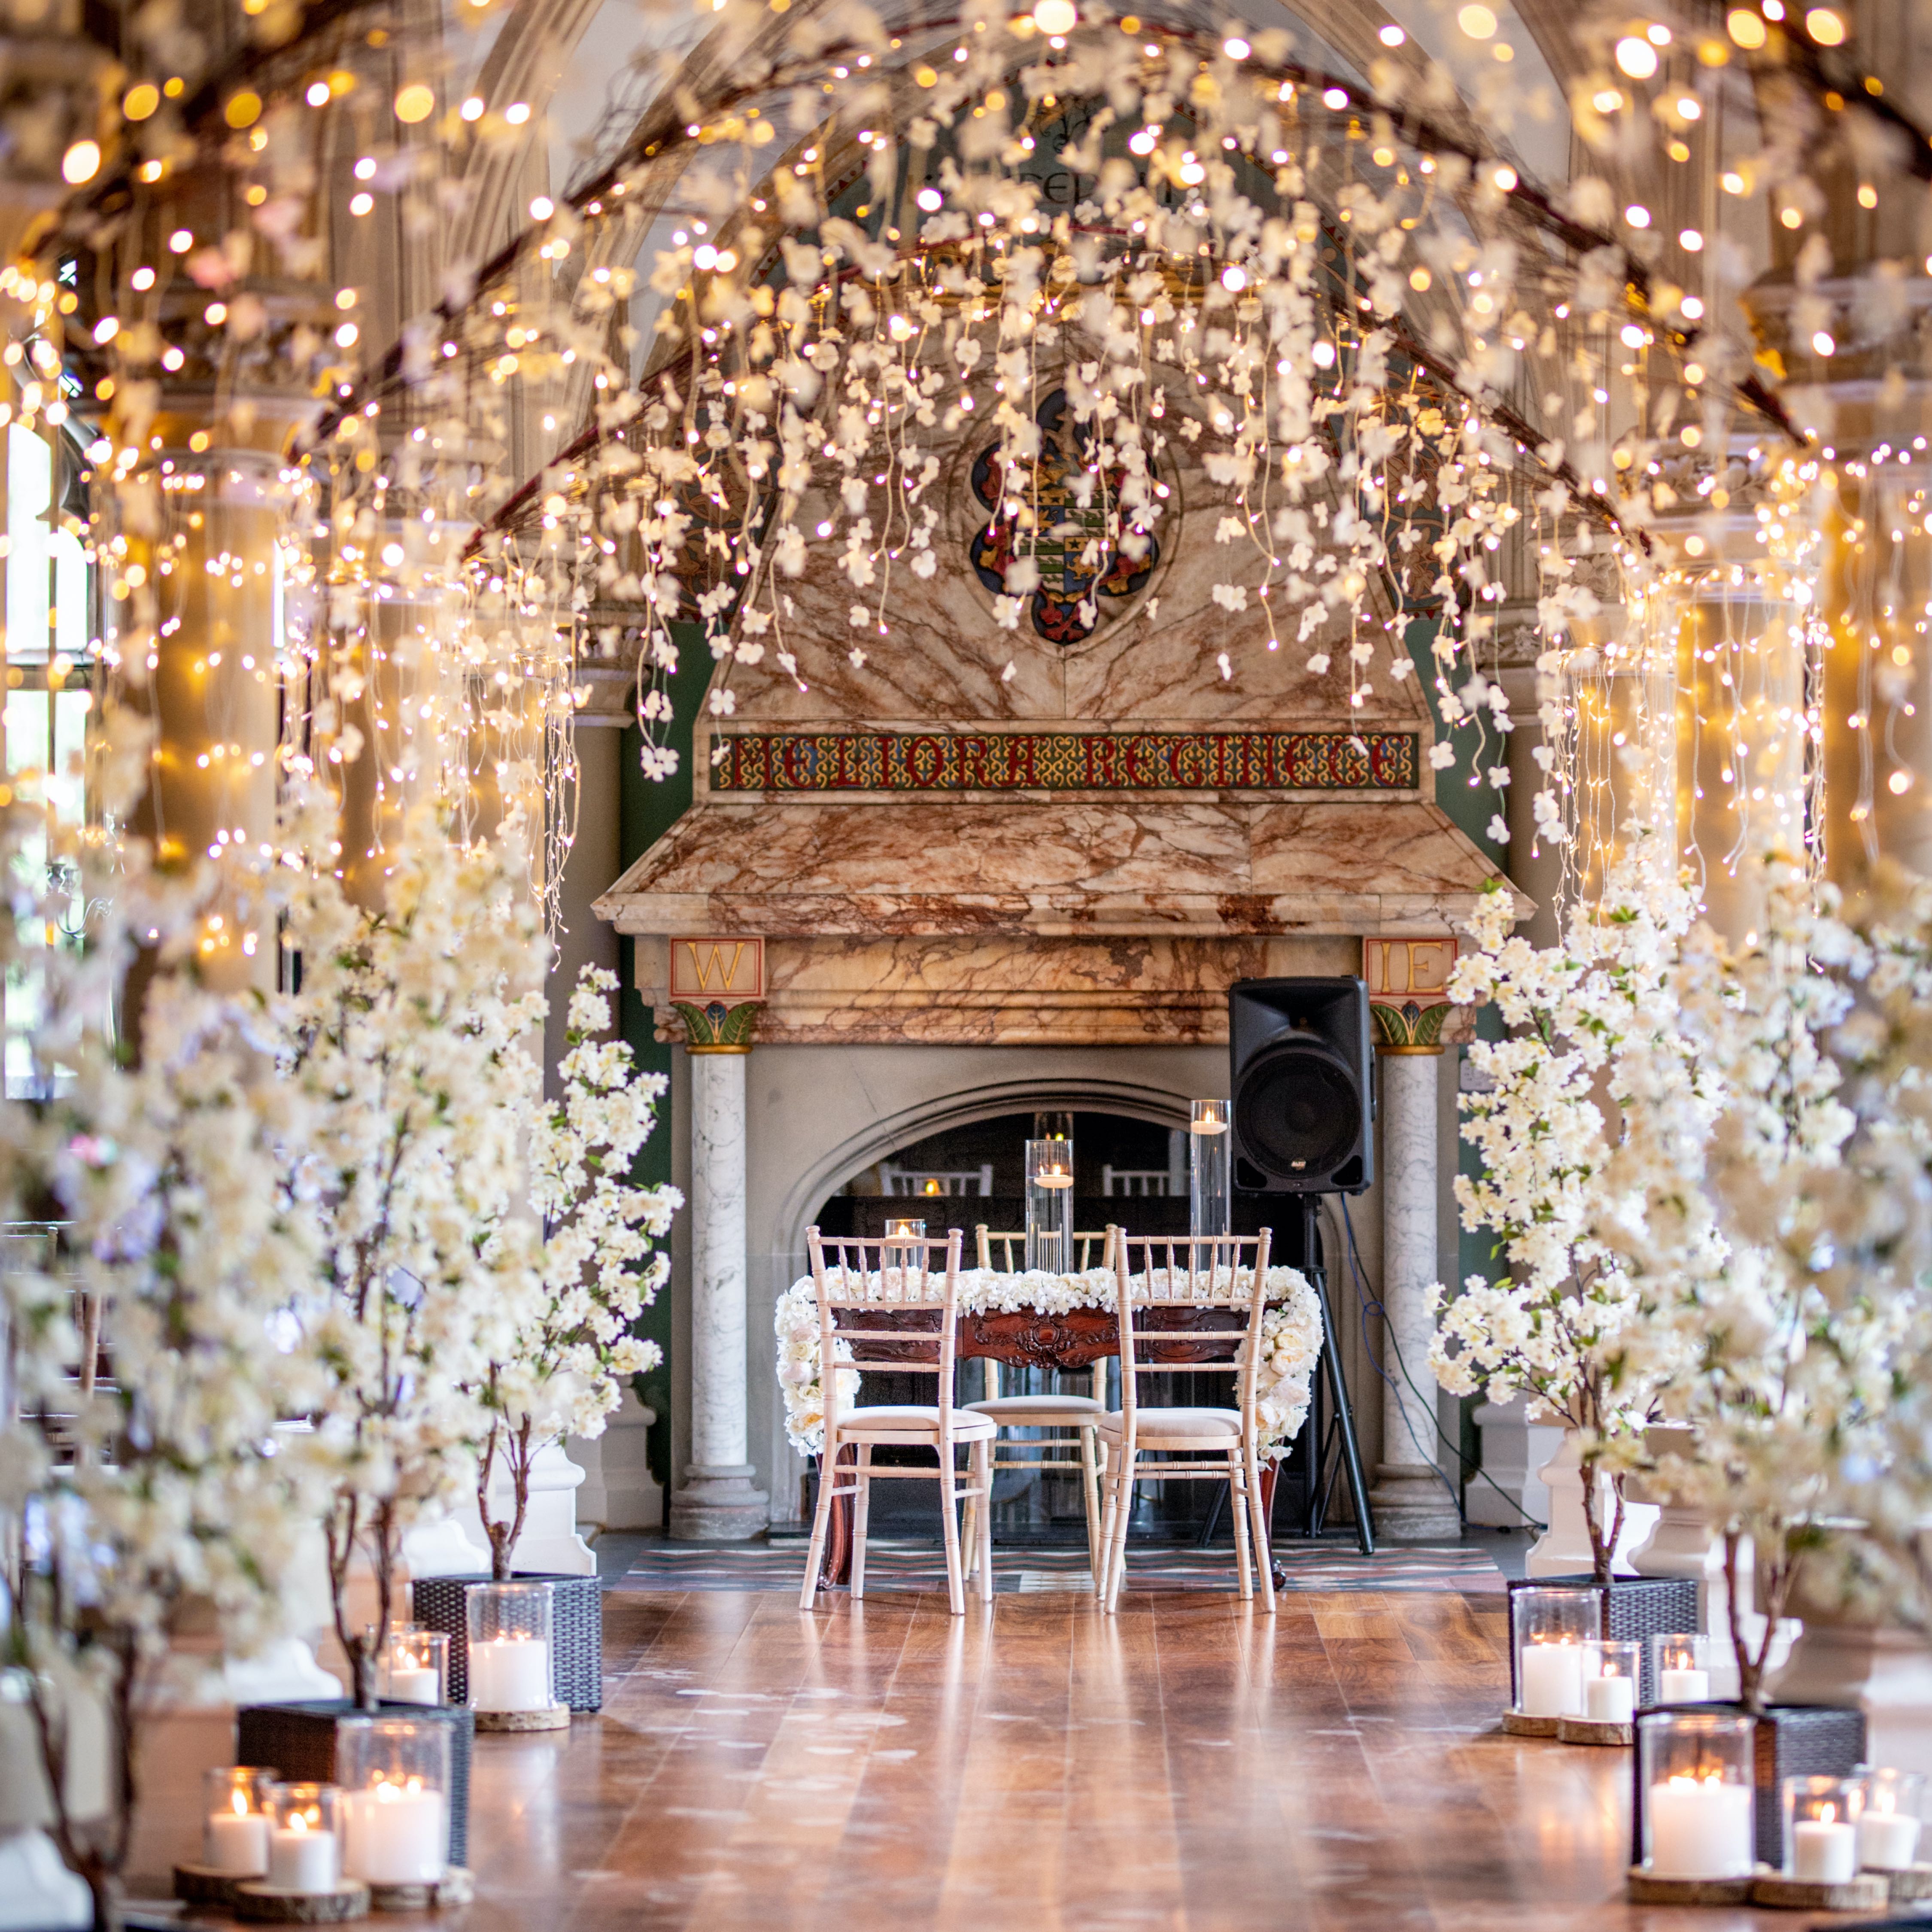 Statement wedding decorations with ceiling lights